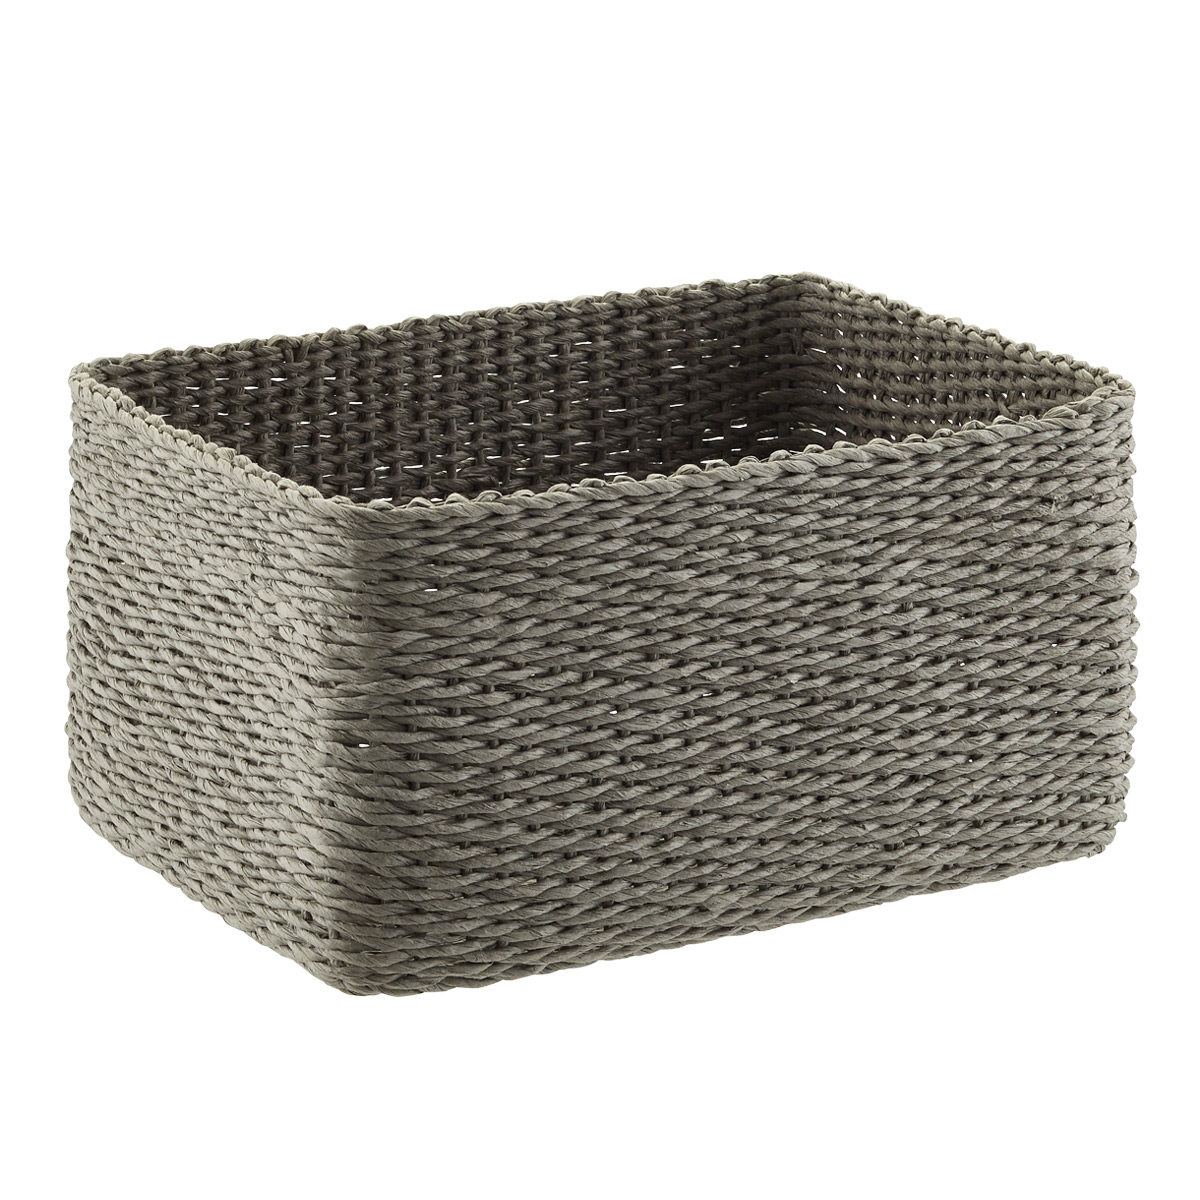 Woven Paper Bins | The Container Store